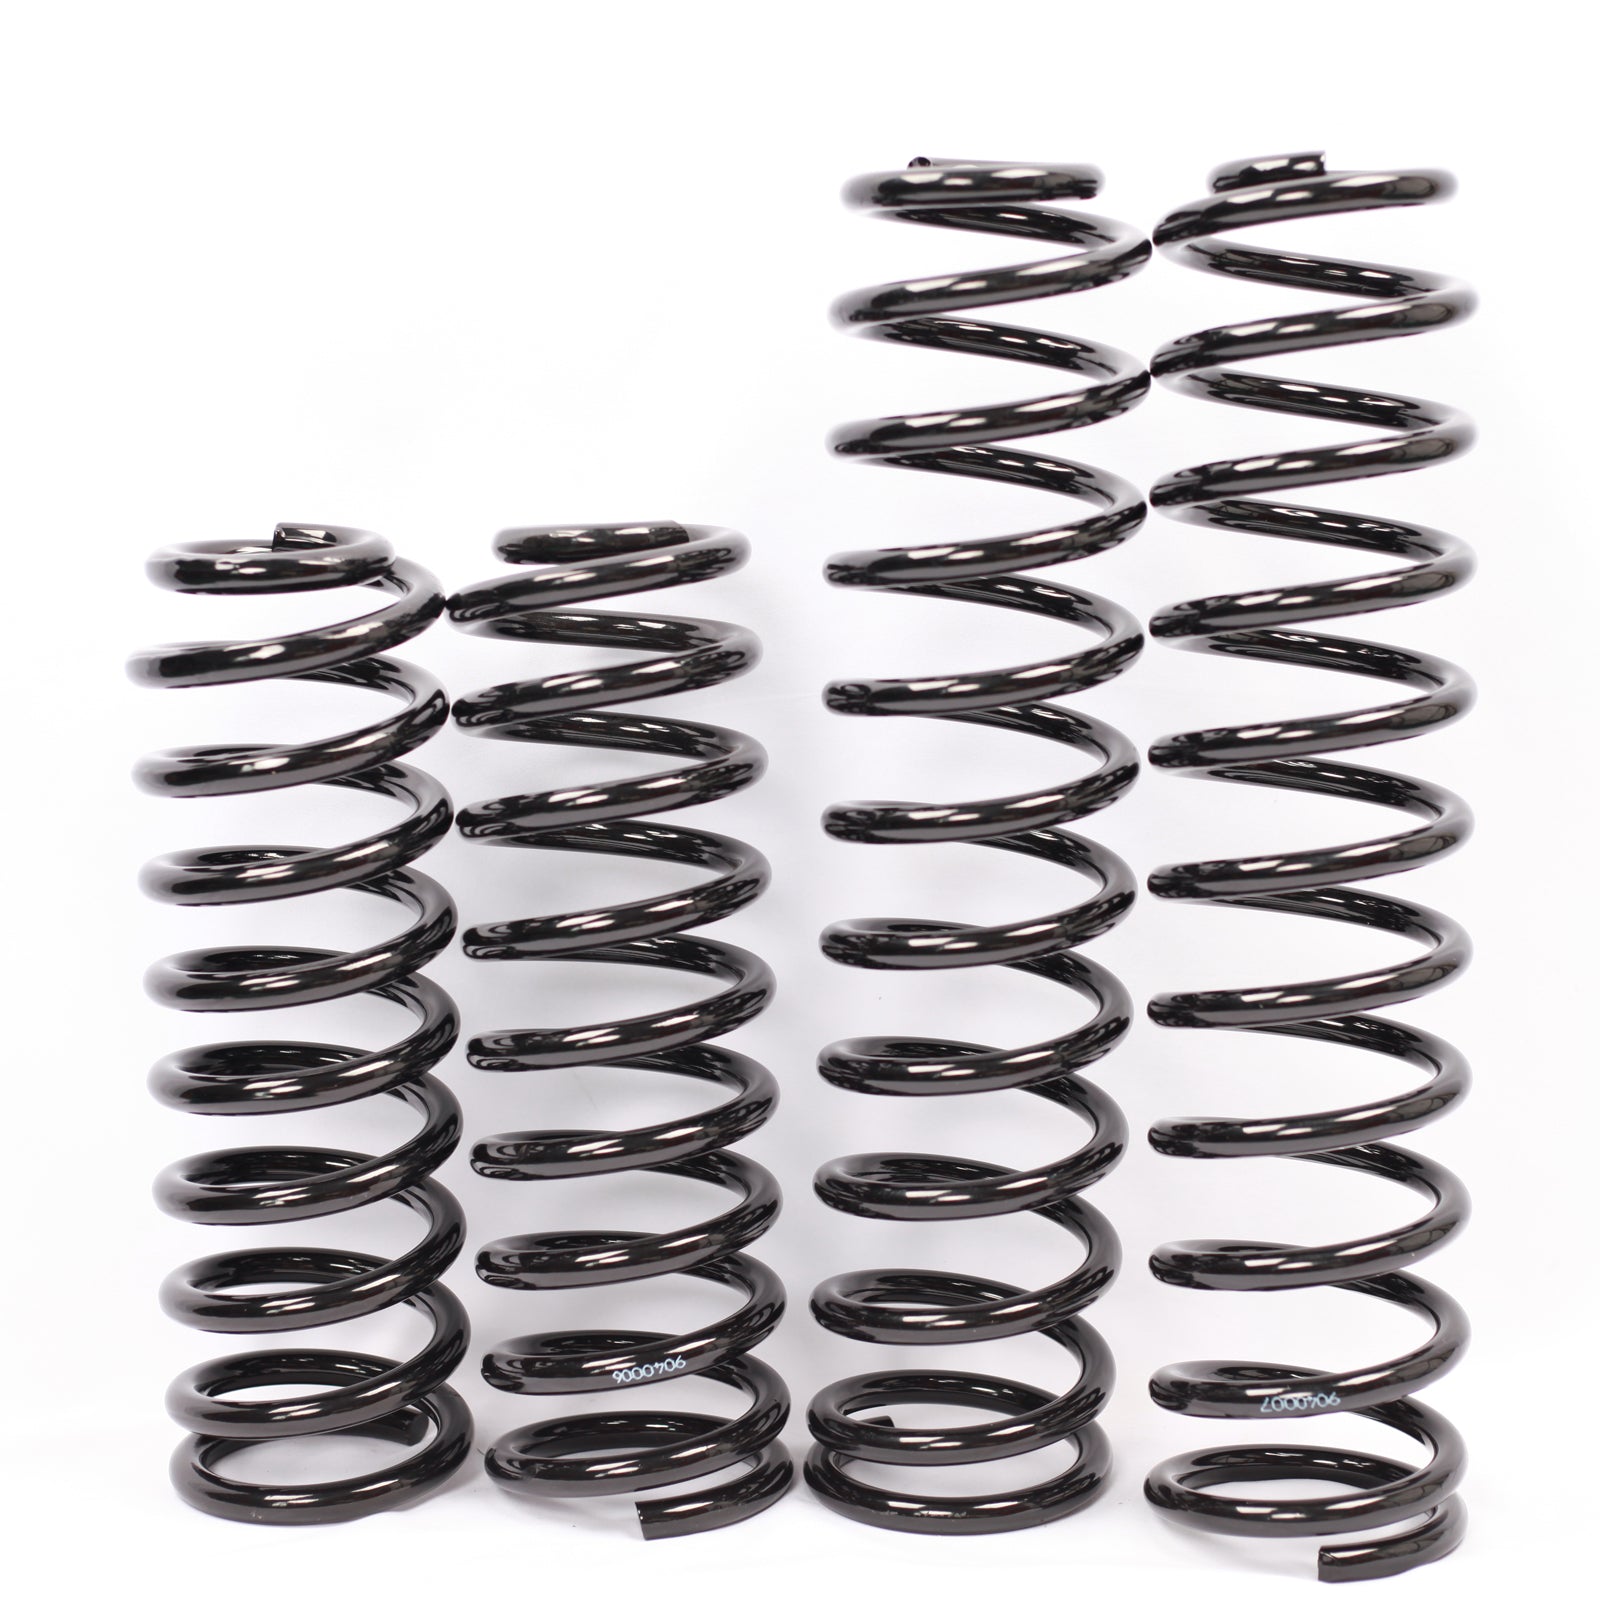 NEXUS SUSPENSION Front & Rear Coil Spring Kits For 3.5-4.5